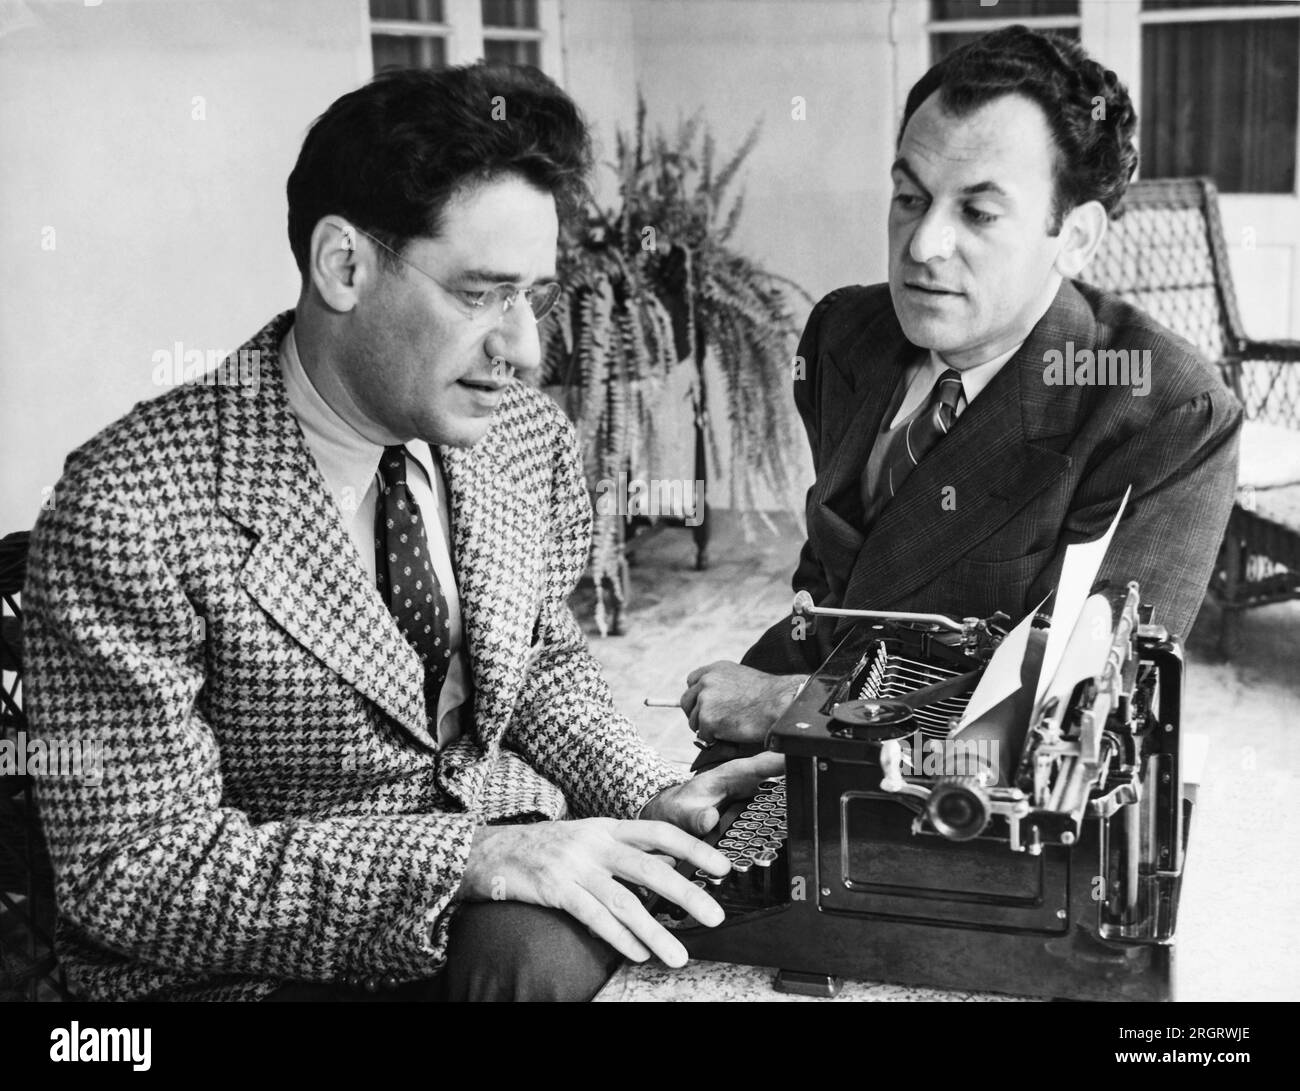 United States:  May 6, 1937 Noted playwrights George S. Kaufman and Moss Hart with Kaufman at a typewriter. The two men collaborated on numerous plays. Stock Photo